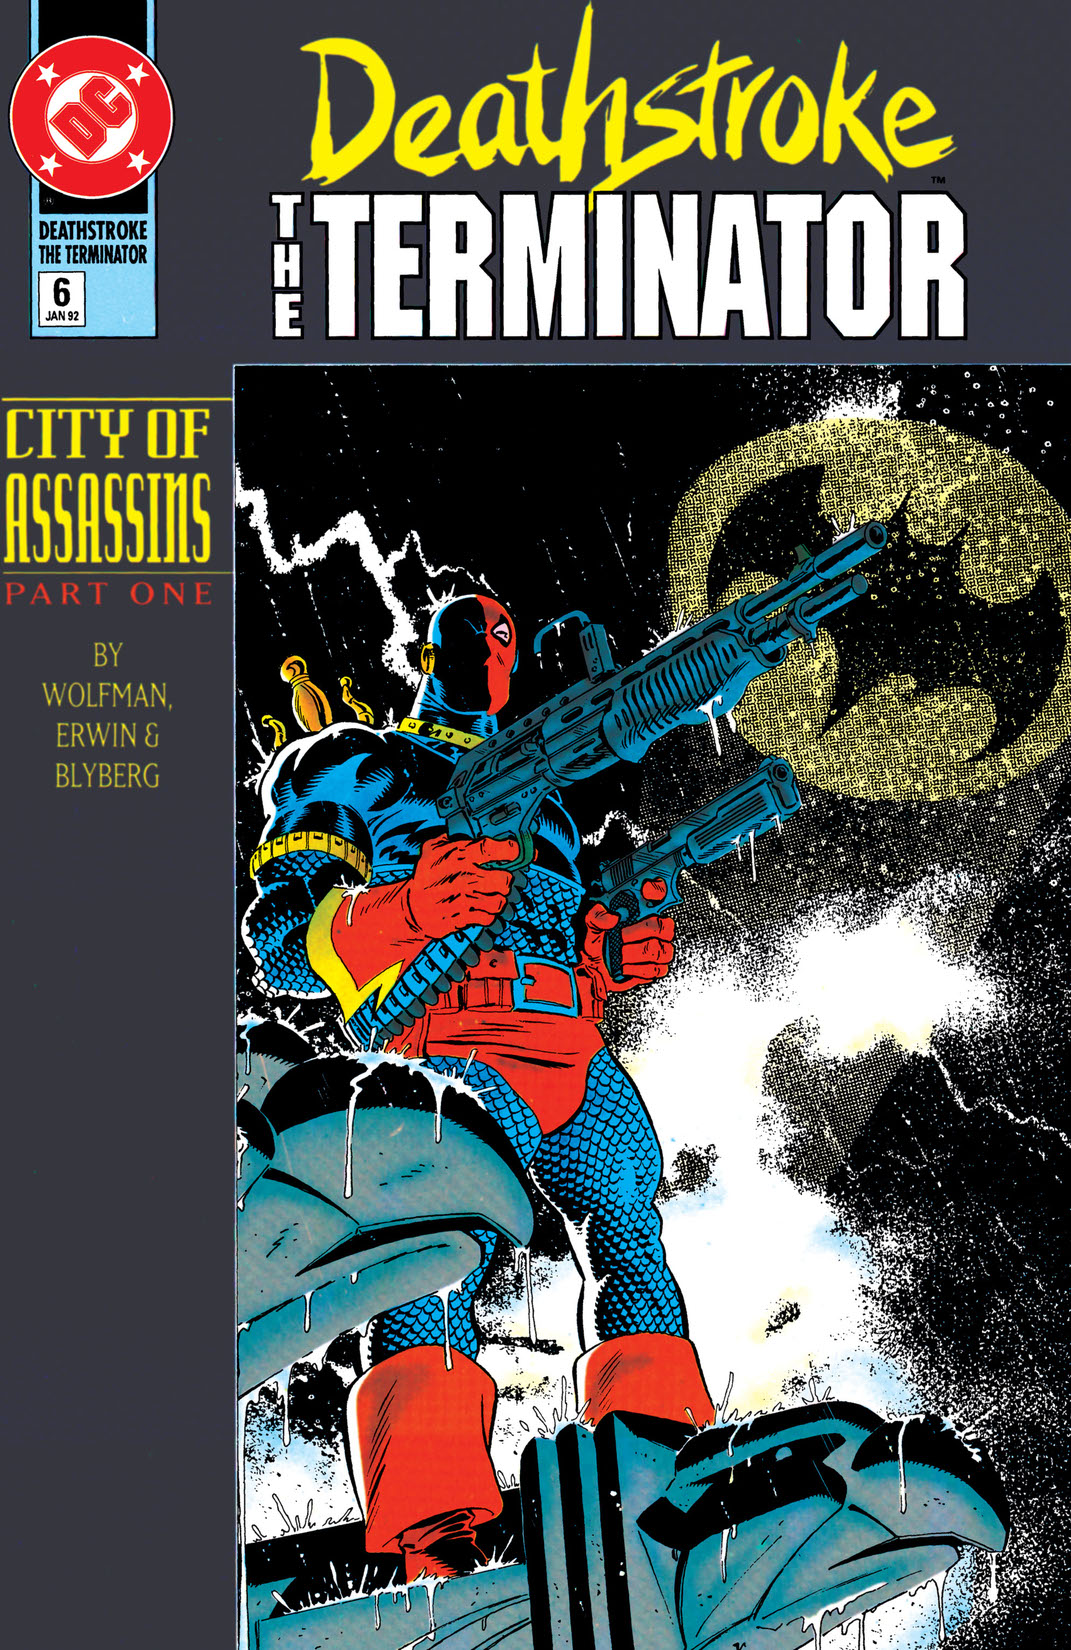 Deathstroke (1991-) #6 preview images